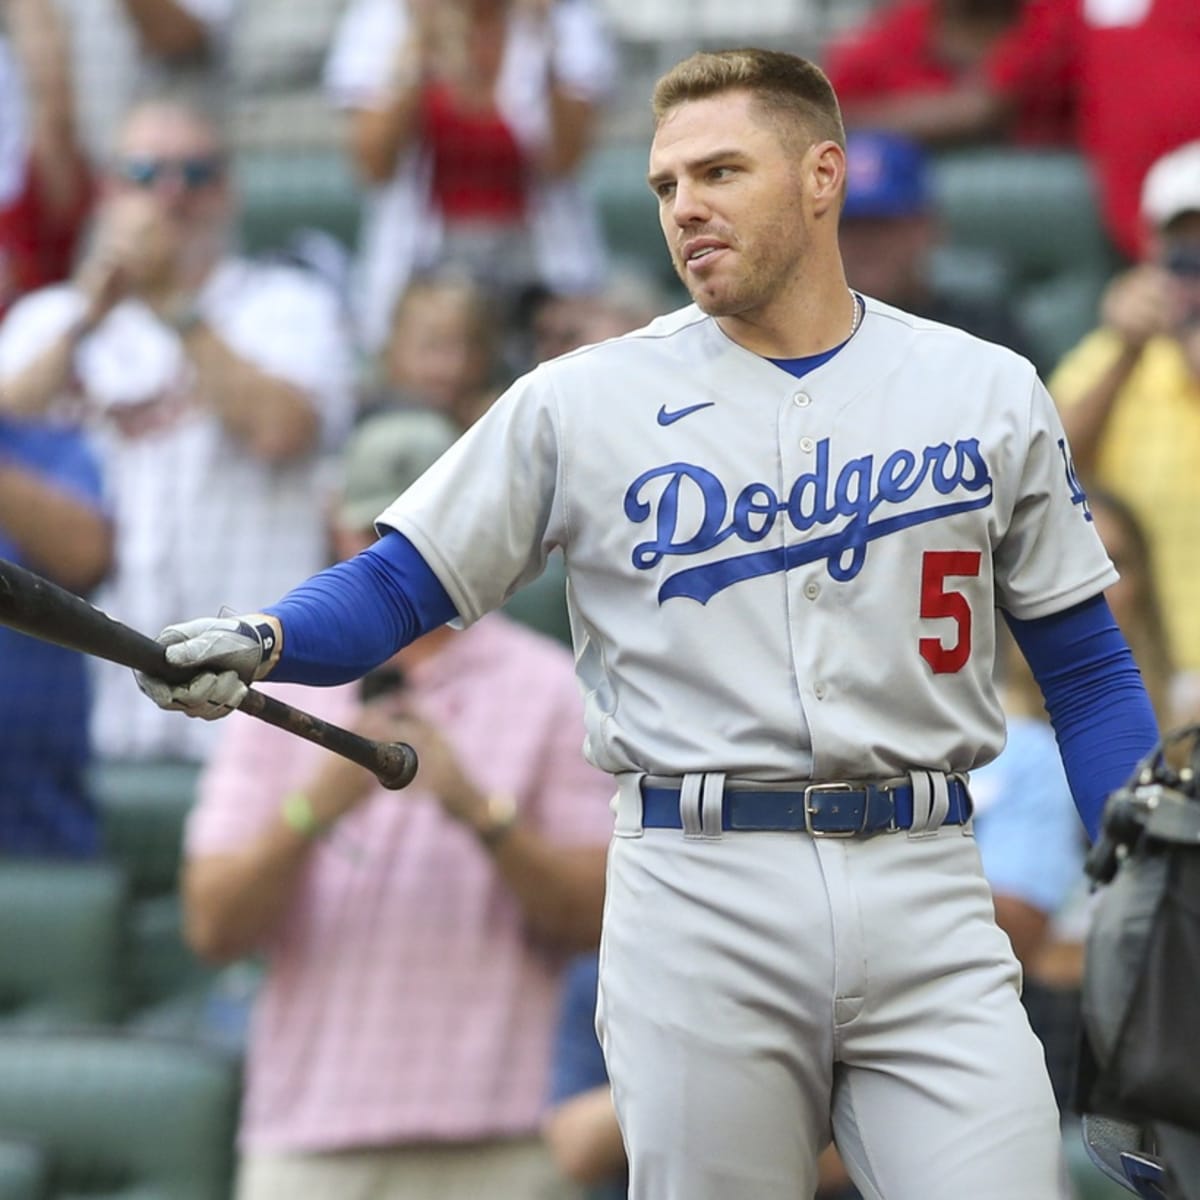 What Team Poses Biggest Threat to Dodgers in 2022 Postseason? – Think Blue  Planning Committee